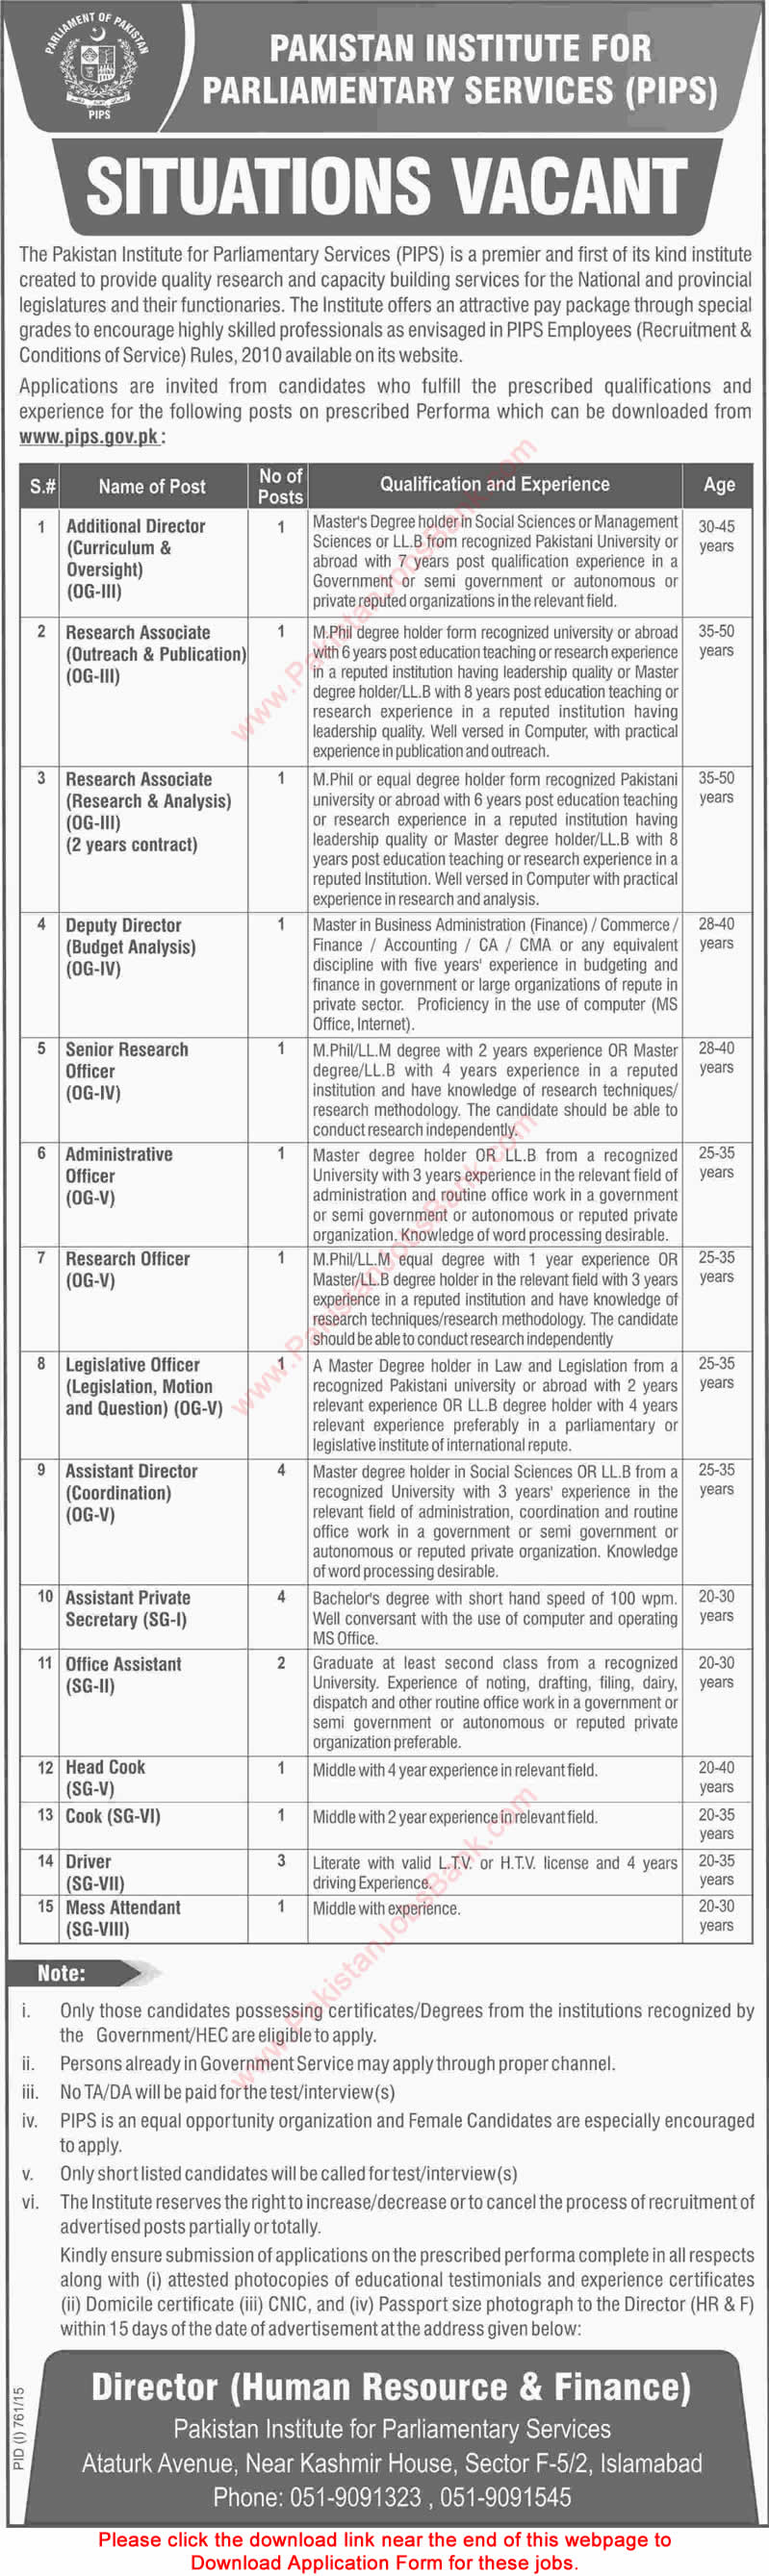 Pakistan Institute of Parliamentary Services Islamabad Jobs 2015 August PIPS Application Form Download